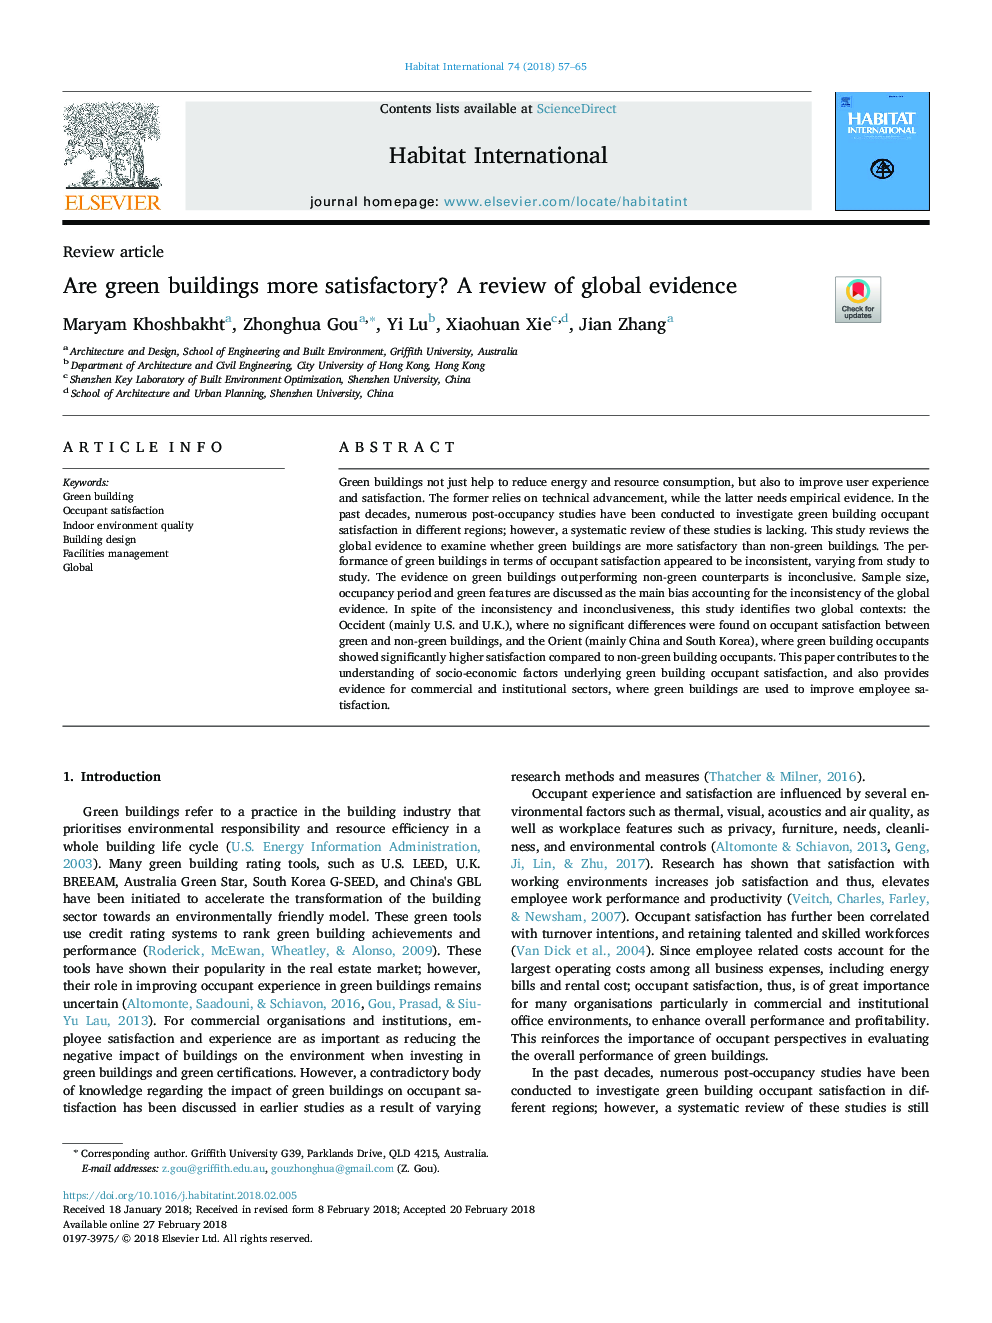 Are green buildings more satisfactory? A review of global evidence